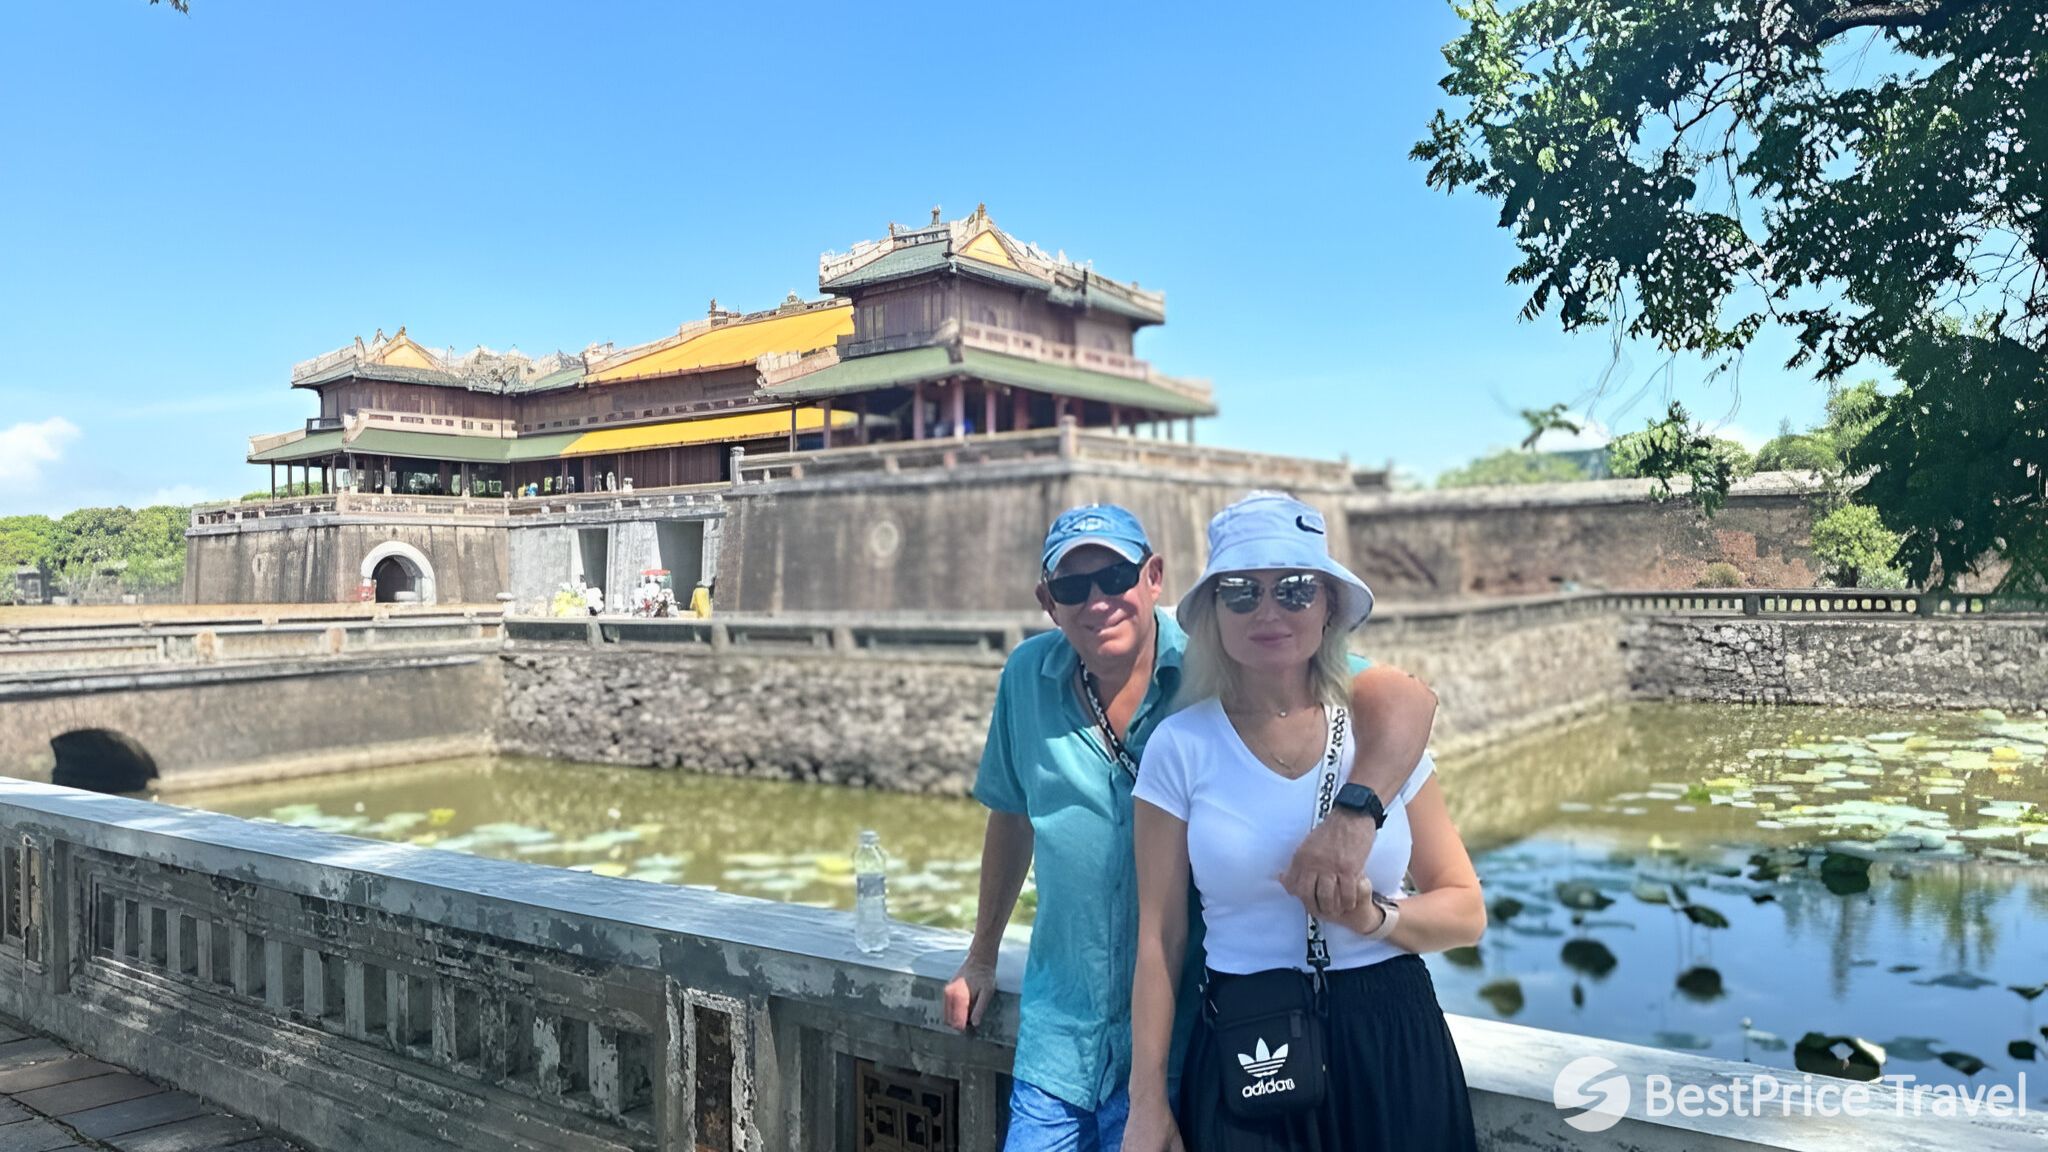 Day 7 Explore The Ancient Imperial Citadel Of Hue